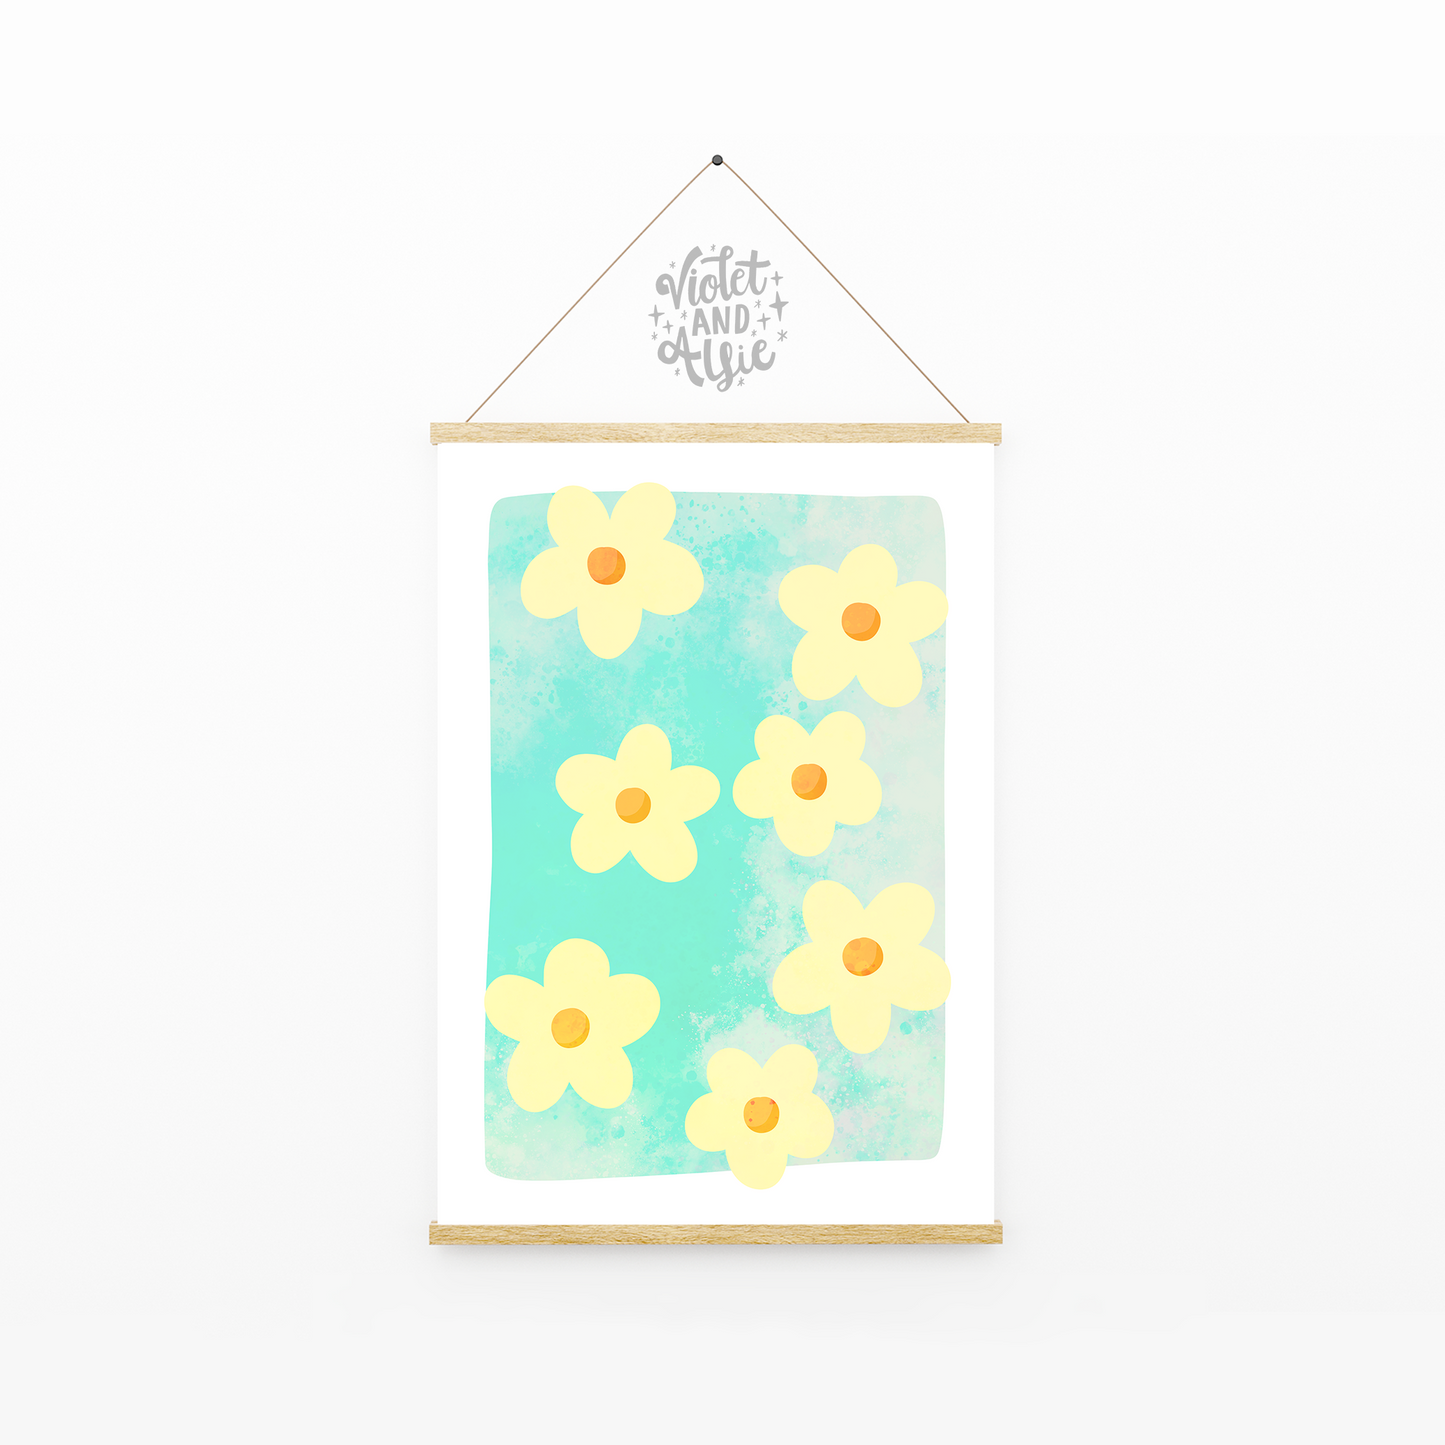 This simple yellow daisy print is fab to brighten up any space. botanical daisy print, flower illustration wall art, Bold flowers wall art, daisies poster, floral wall print, fresh summer decor, daisy flower art prints, green yellow art, botanical prints, flower market prints, fun flower wall prints, colourful decor